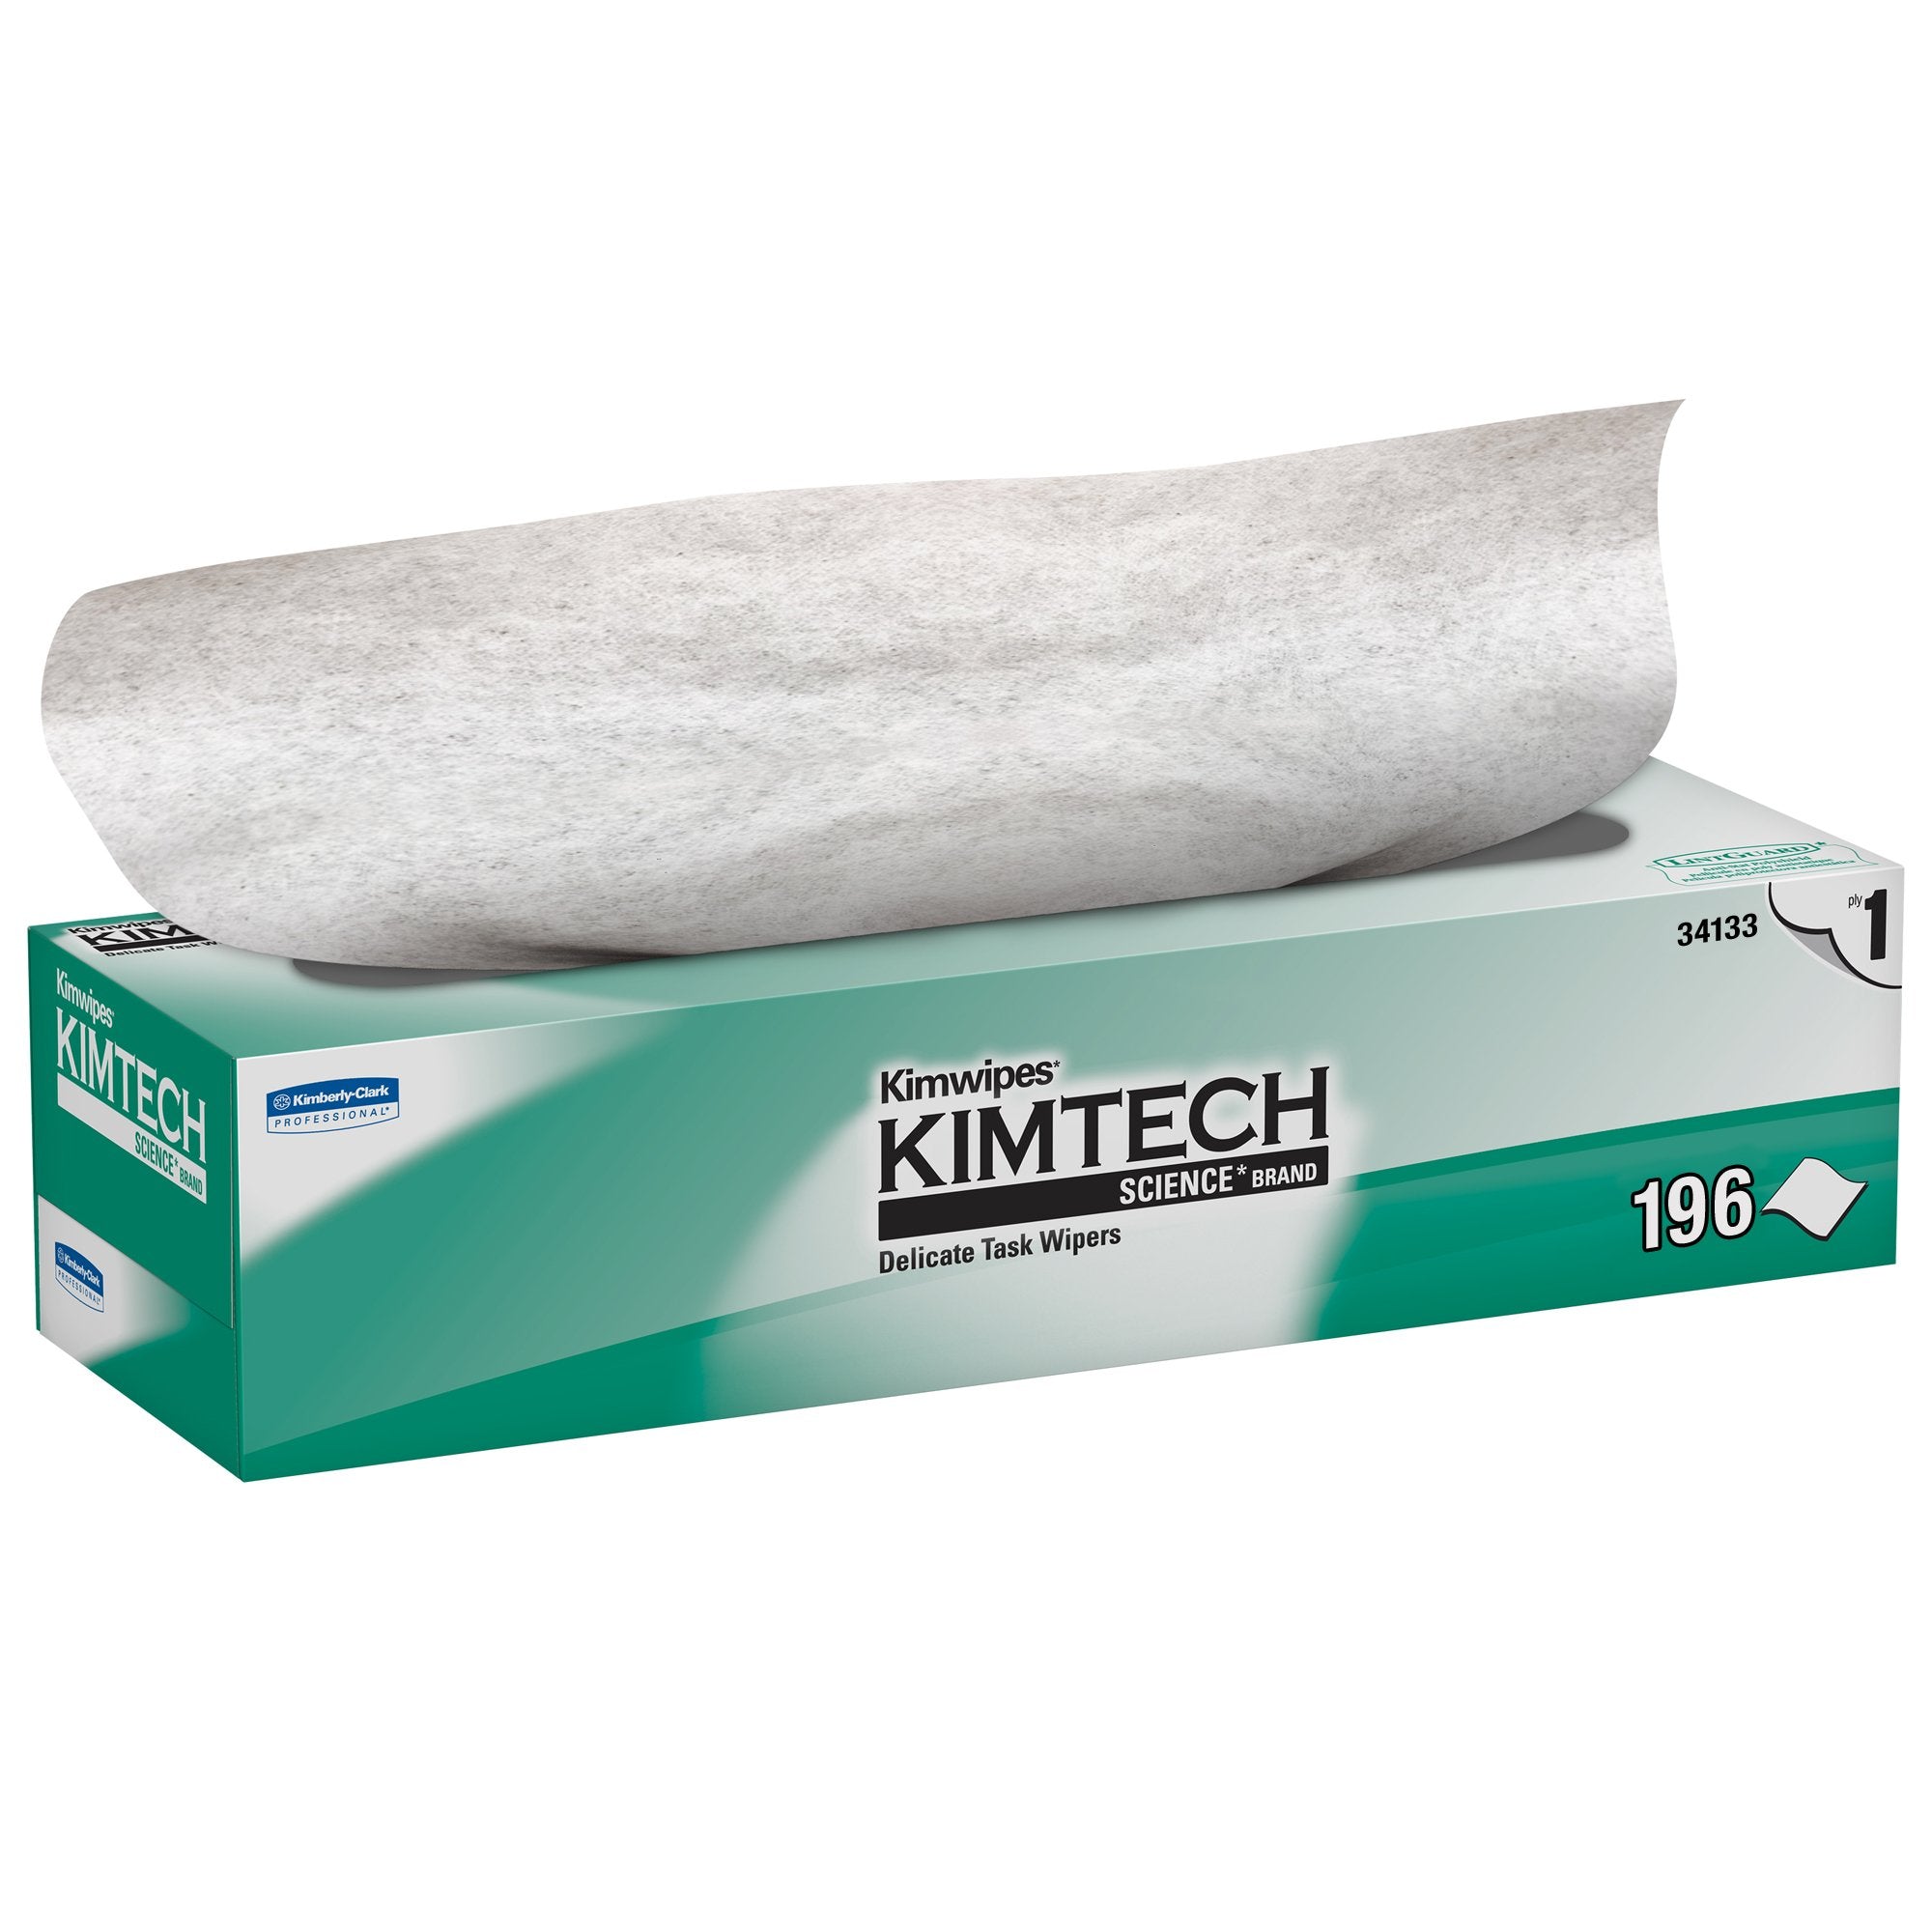 Delicate Task Wipe Kimtech Science Kimwipes Light Duty White NonSterile 1 Ply Tissue 11-4/5 X 11-4/5 Inch Disposable